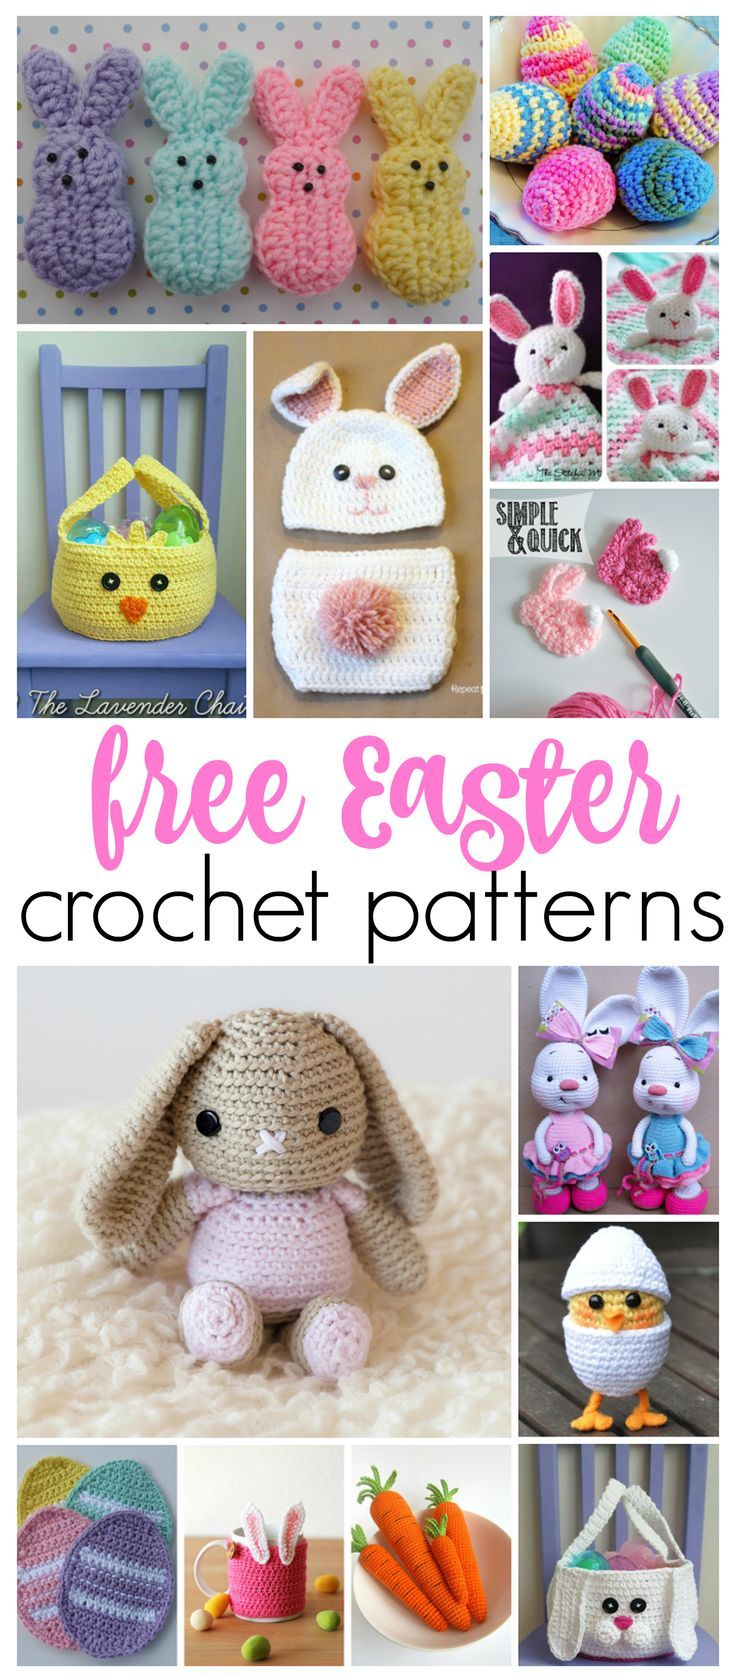 Free Easter Crochet Patterns So Many Adorable Free Easter Crochet Patternsbunnys Chicks Eggs